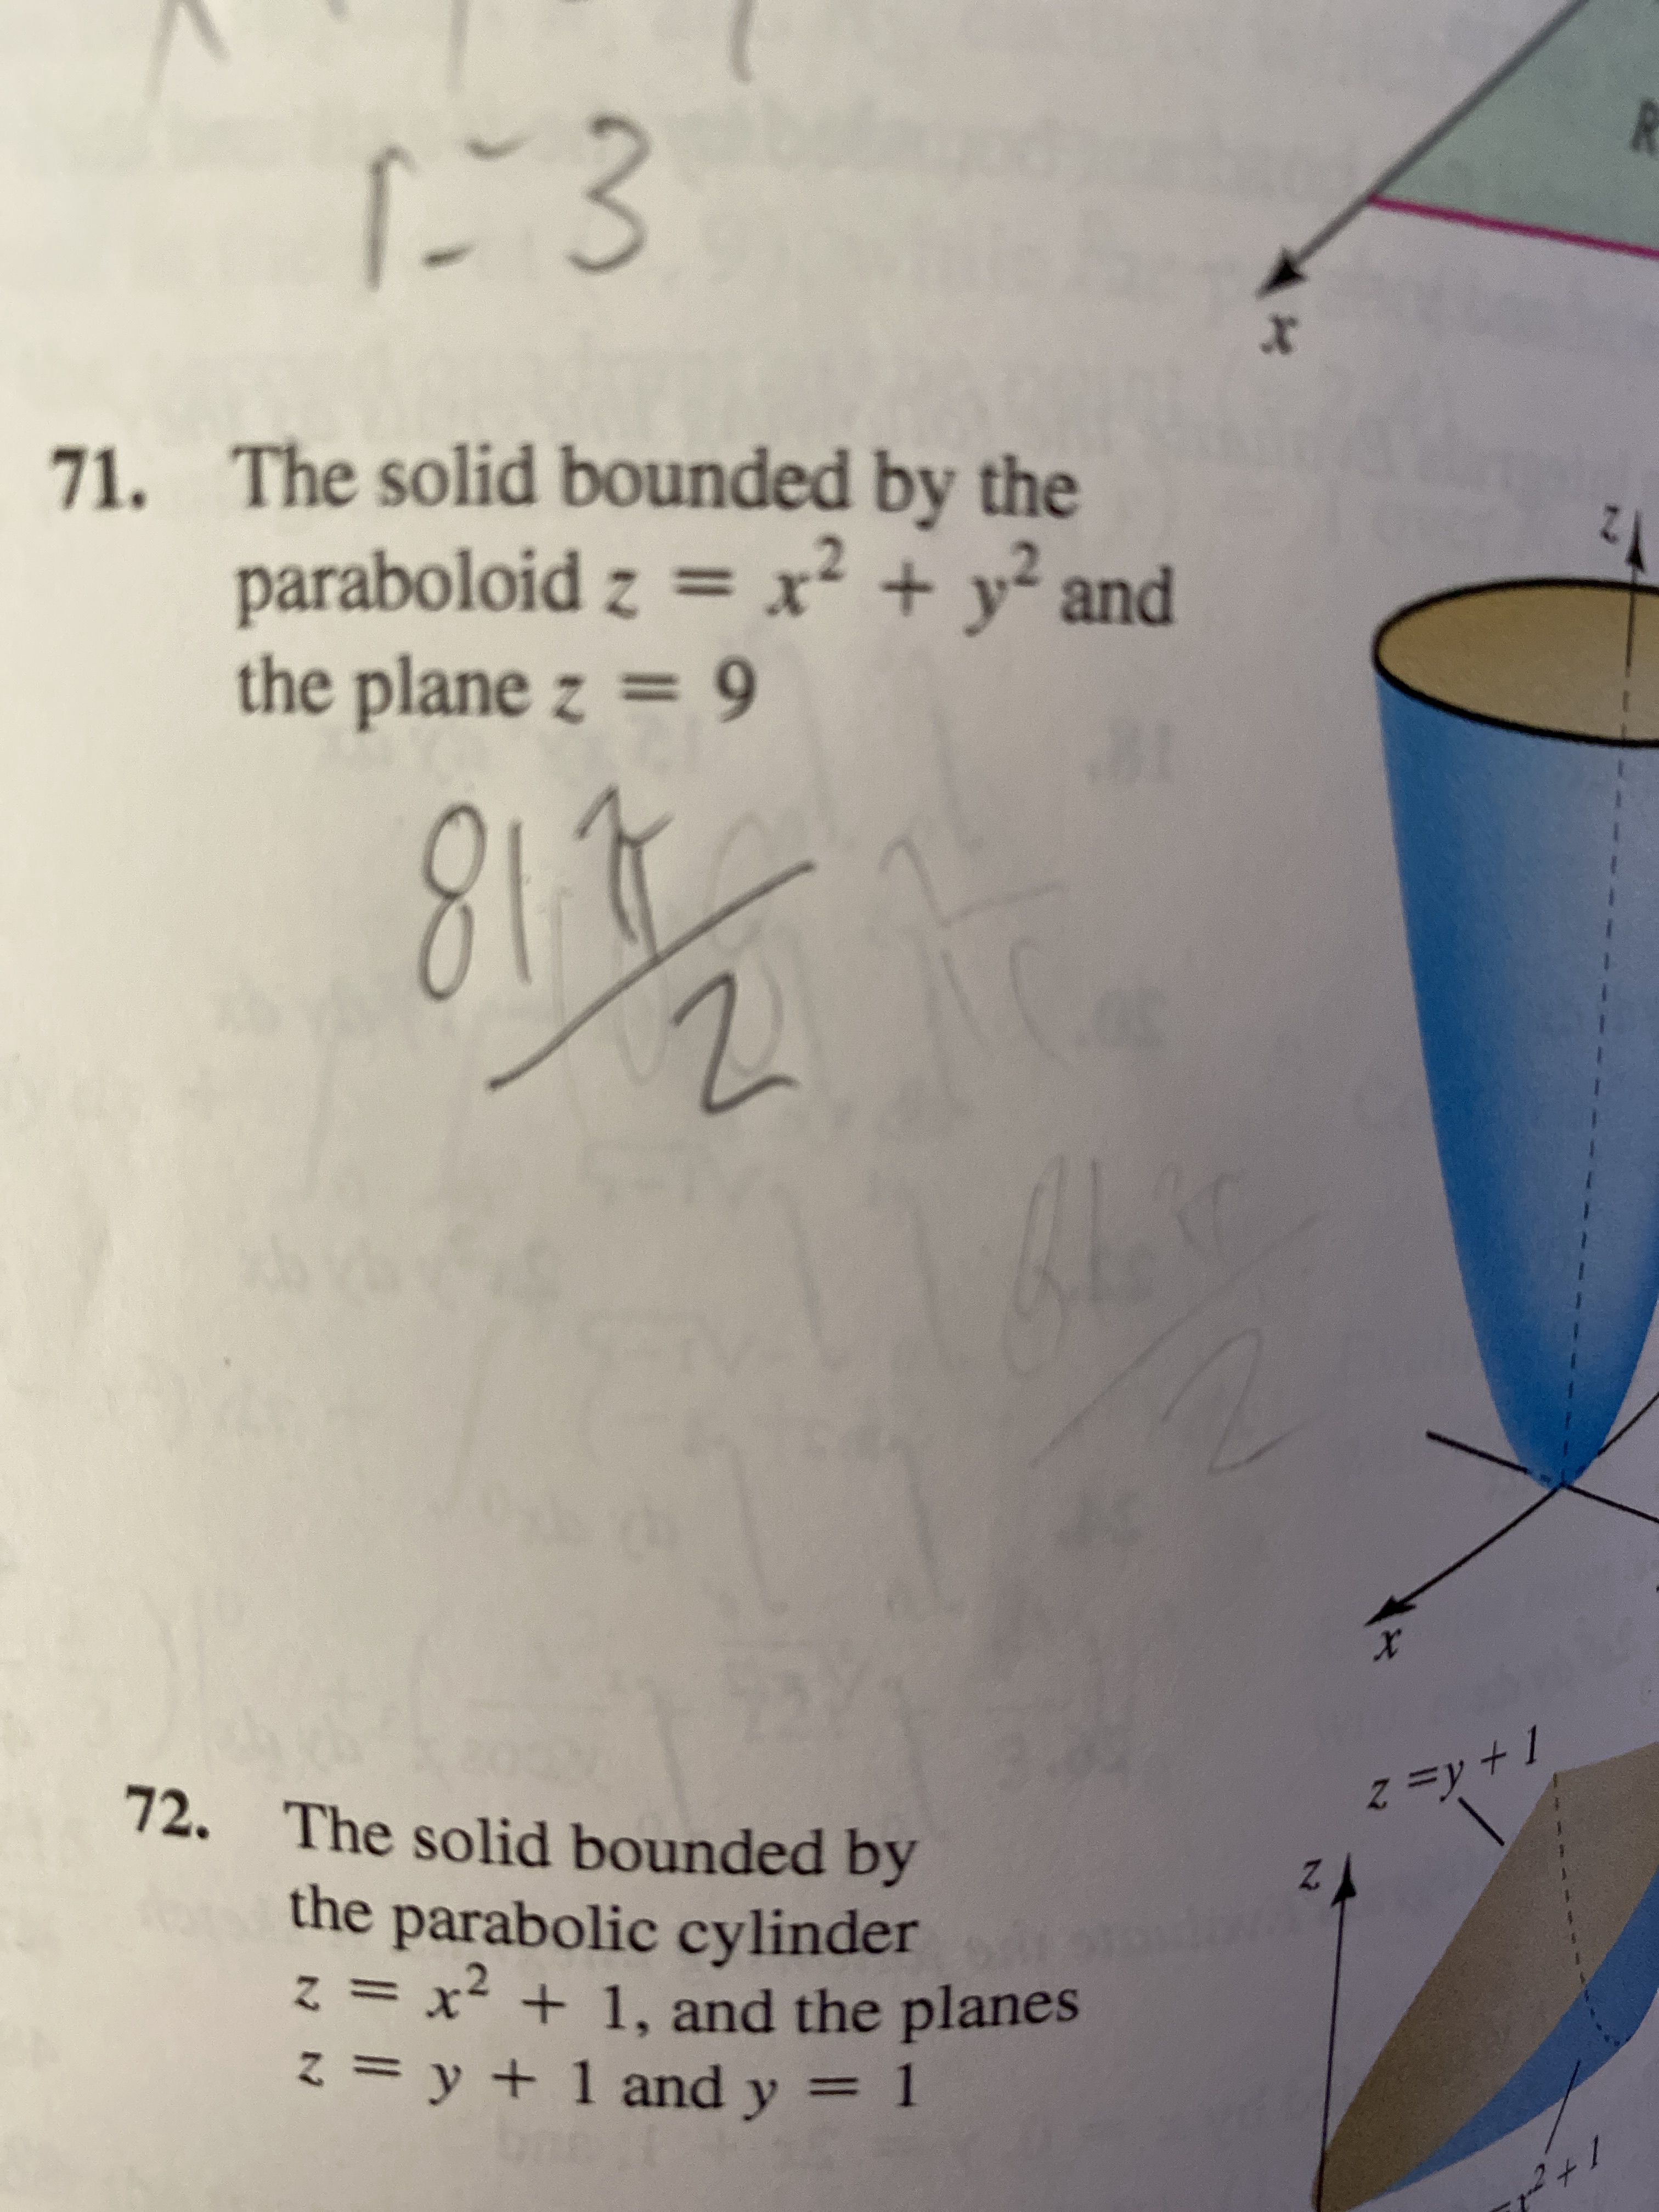 Answered 71 The Solid Bounded By The Paraboloid Bartleby